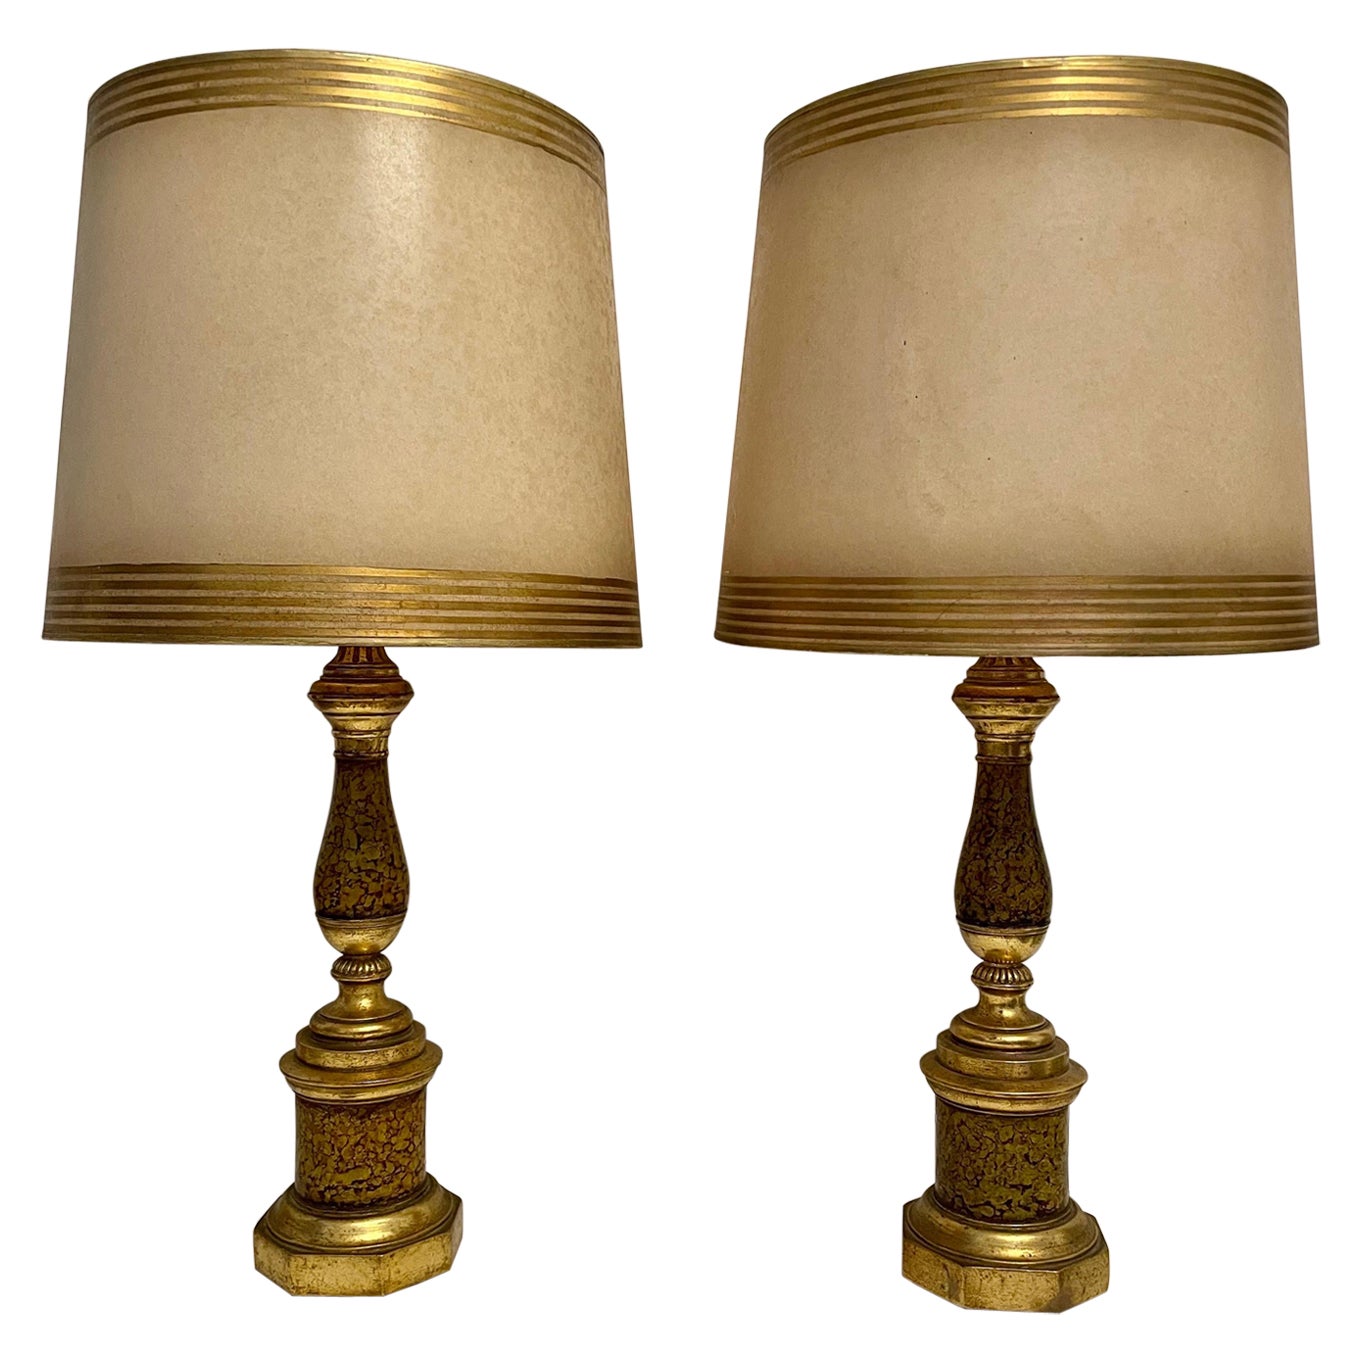 Pair Of Painted and Gilt Borghese Table Lamps For Sale